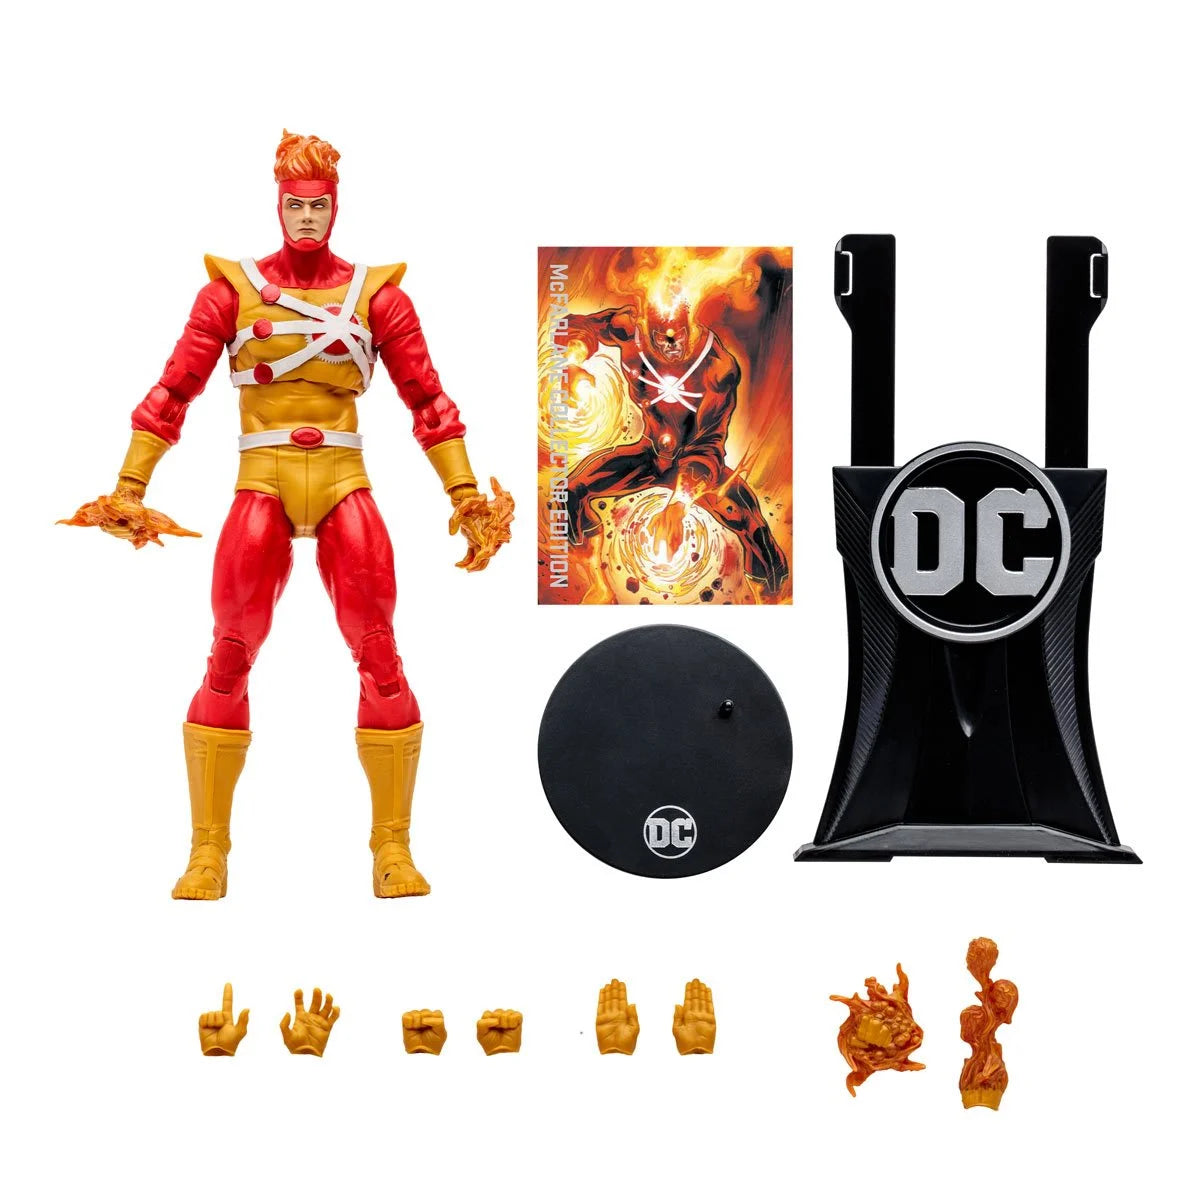 DC McFarlane Collector Edition Wave 2 Firestorm Crisis on Infinite Earths 7-Inch Scale Action Figure with accessories - Heretoserveyou